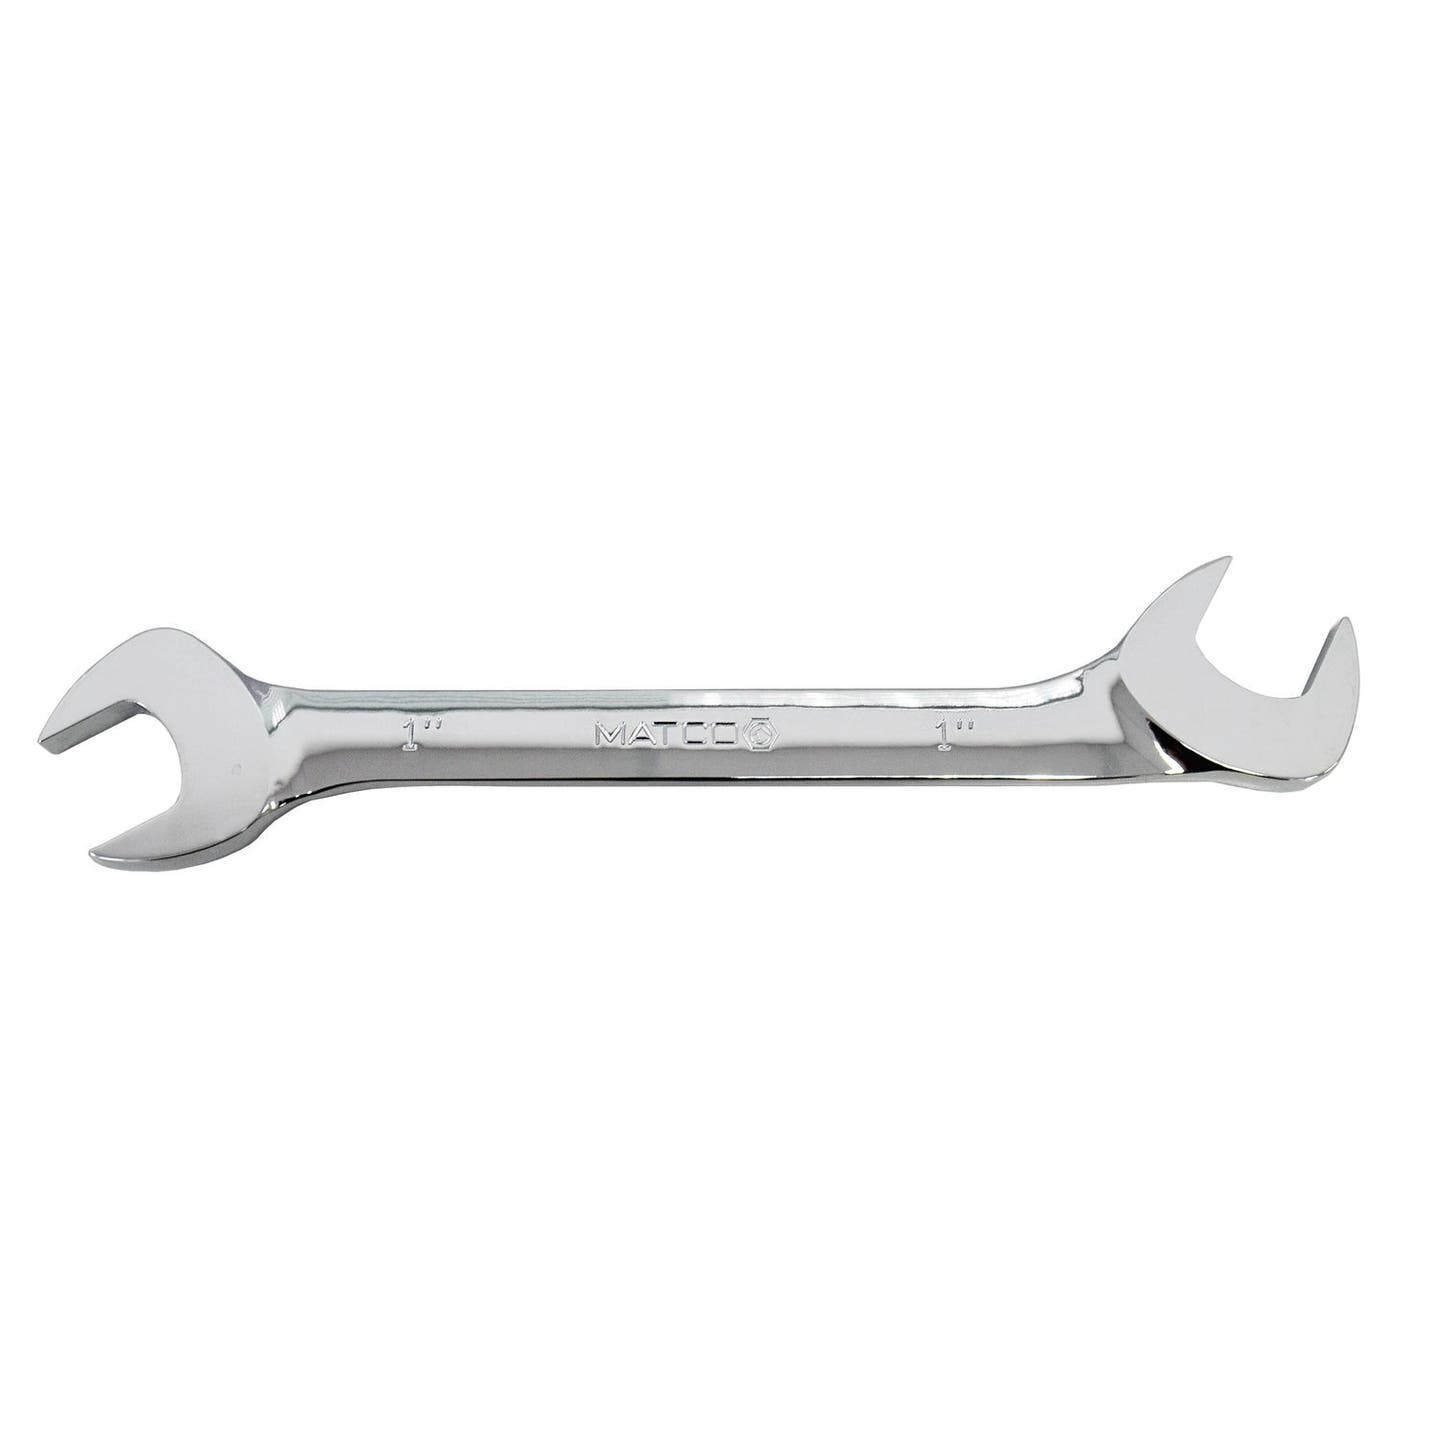 1" DOUBLE OPEN ANGLE WRENCH